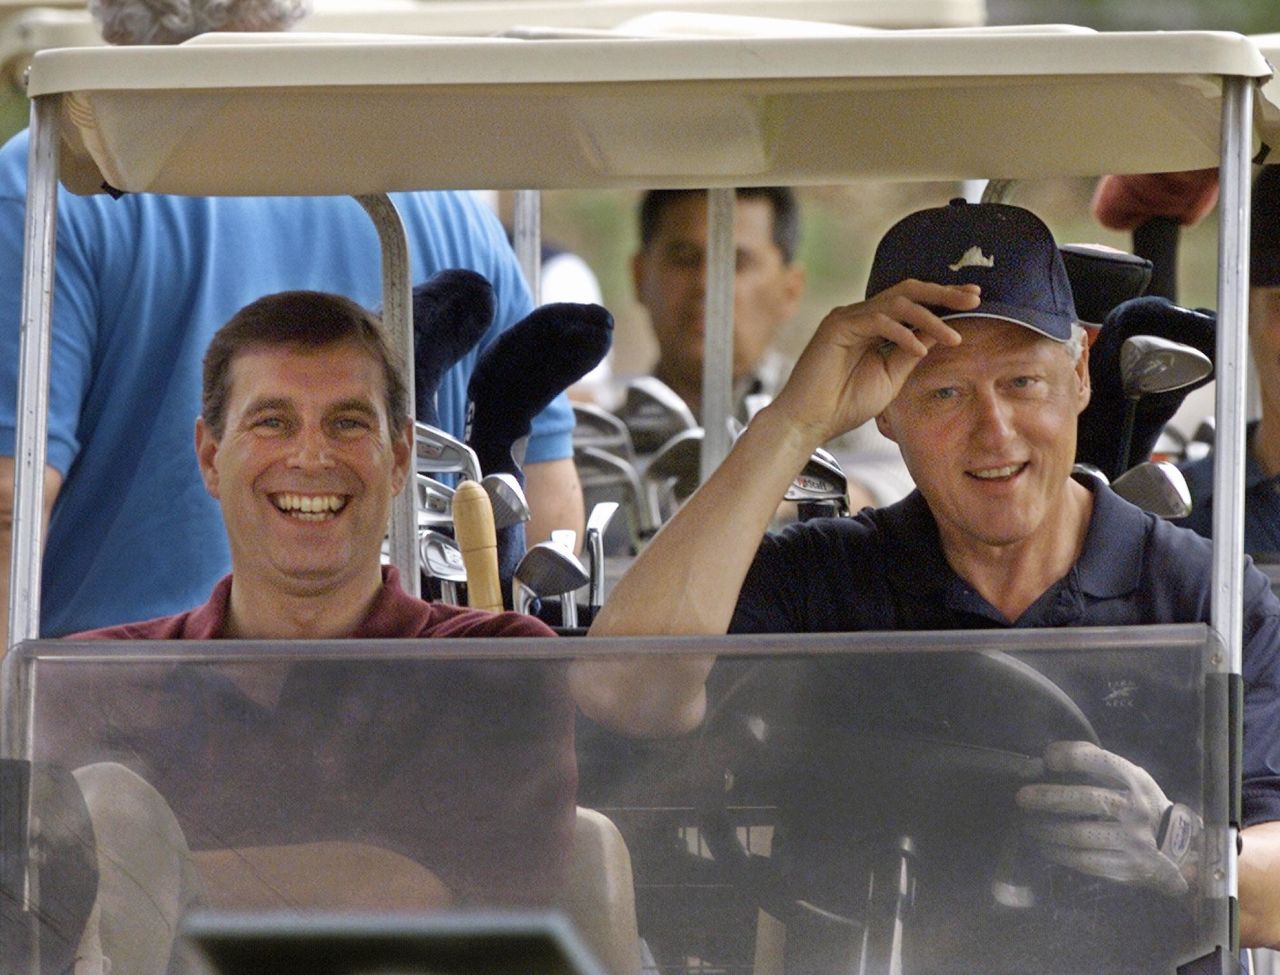 Prince Andrew, pictured with President Bill Clinton at Martha's Vineyard in 1999, is a keen golfer and reported to have a handicap that would allow him to play professionally.